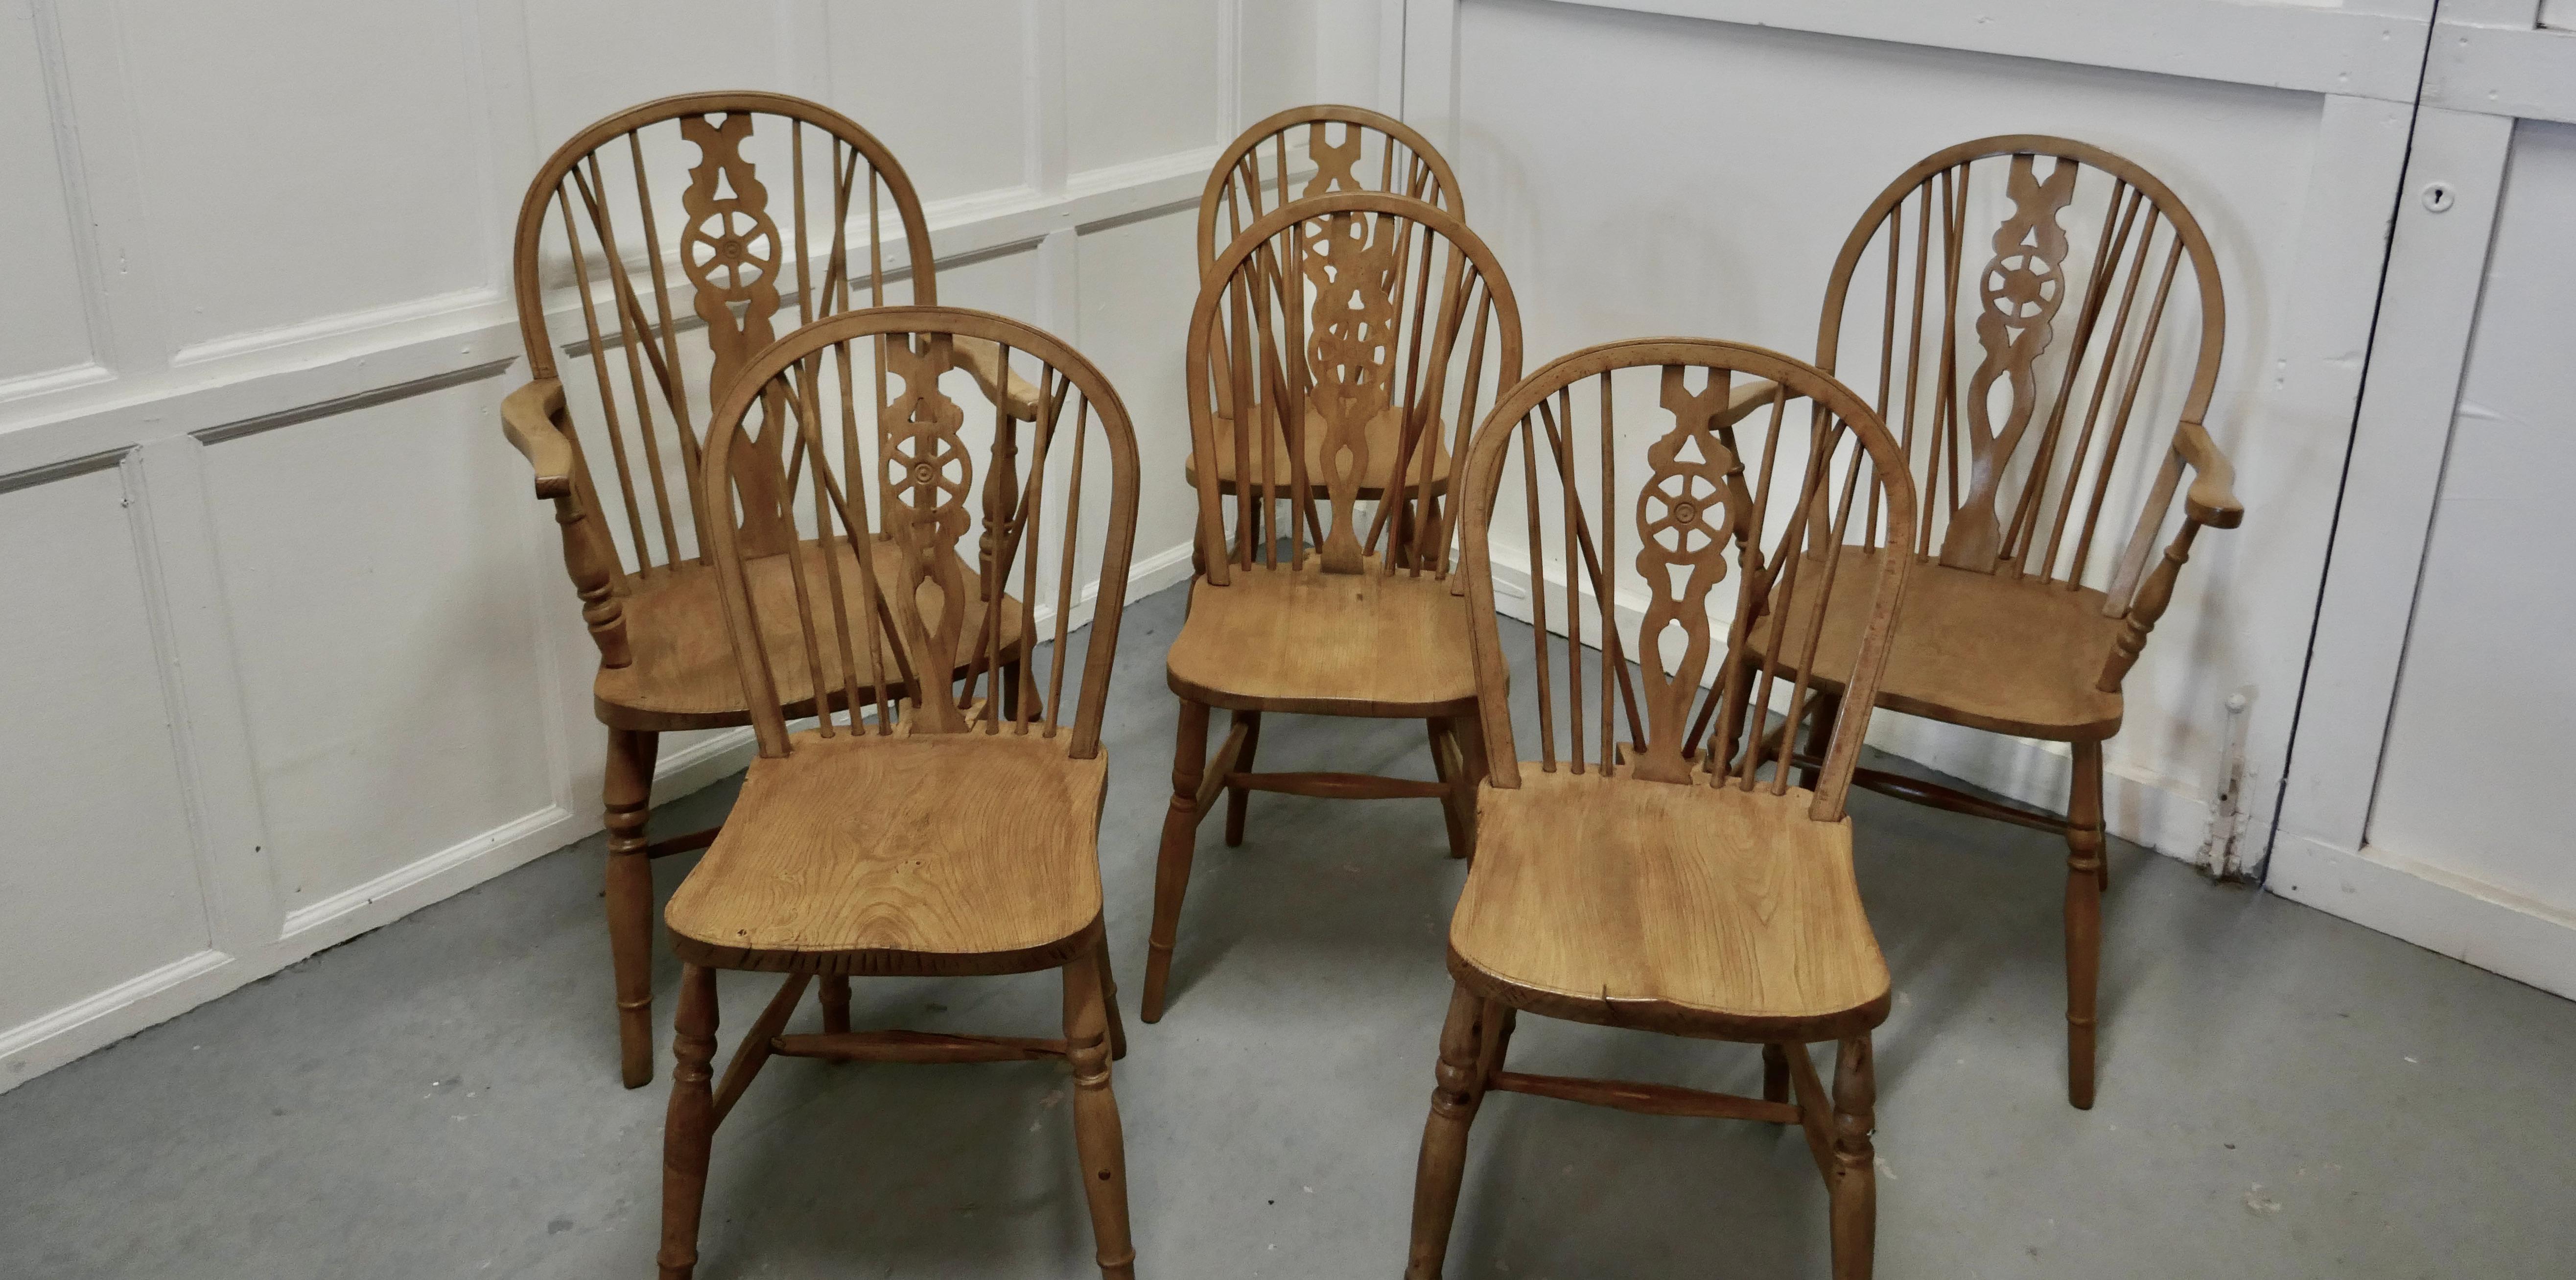 Set of 6 beech & elm wheel back Windsor kitchen dining chairs

This is a harlequin set of chairs meaning that there are very slight differences in the turnings, the chairs are a classic design and traditionally made from solid wood they have